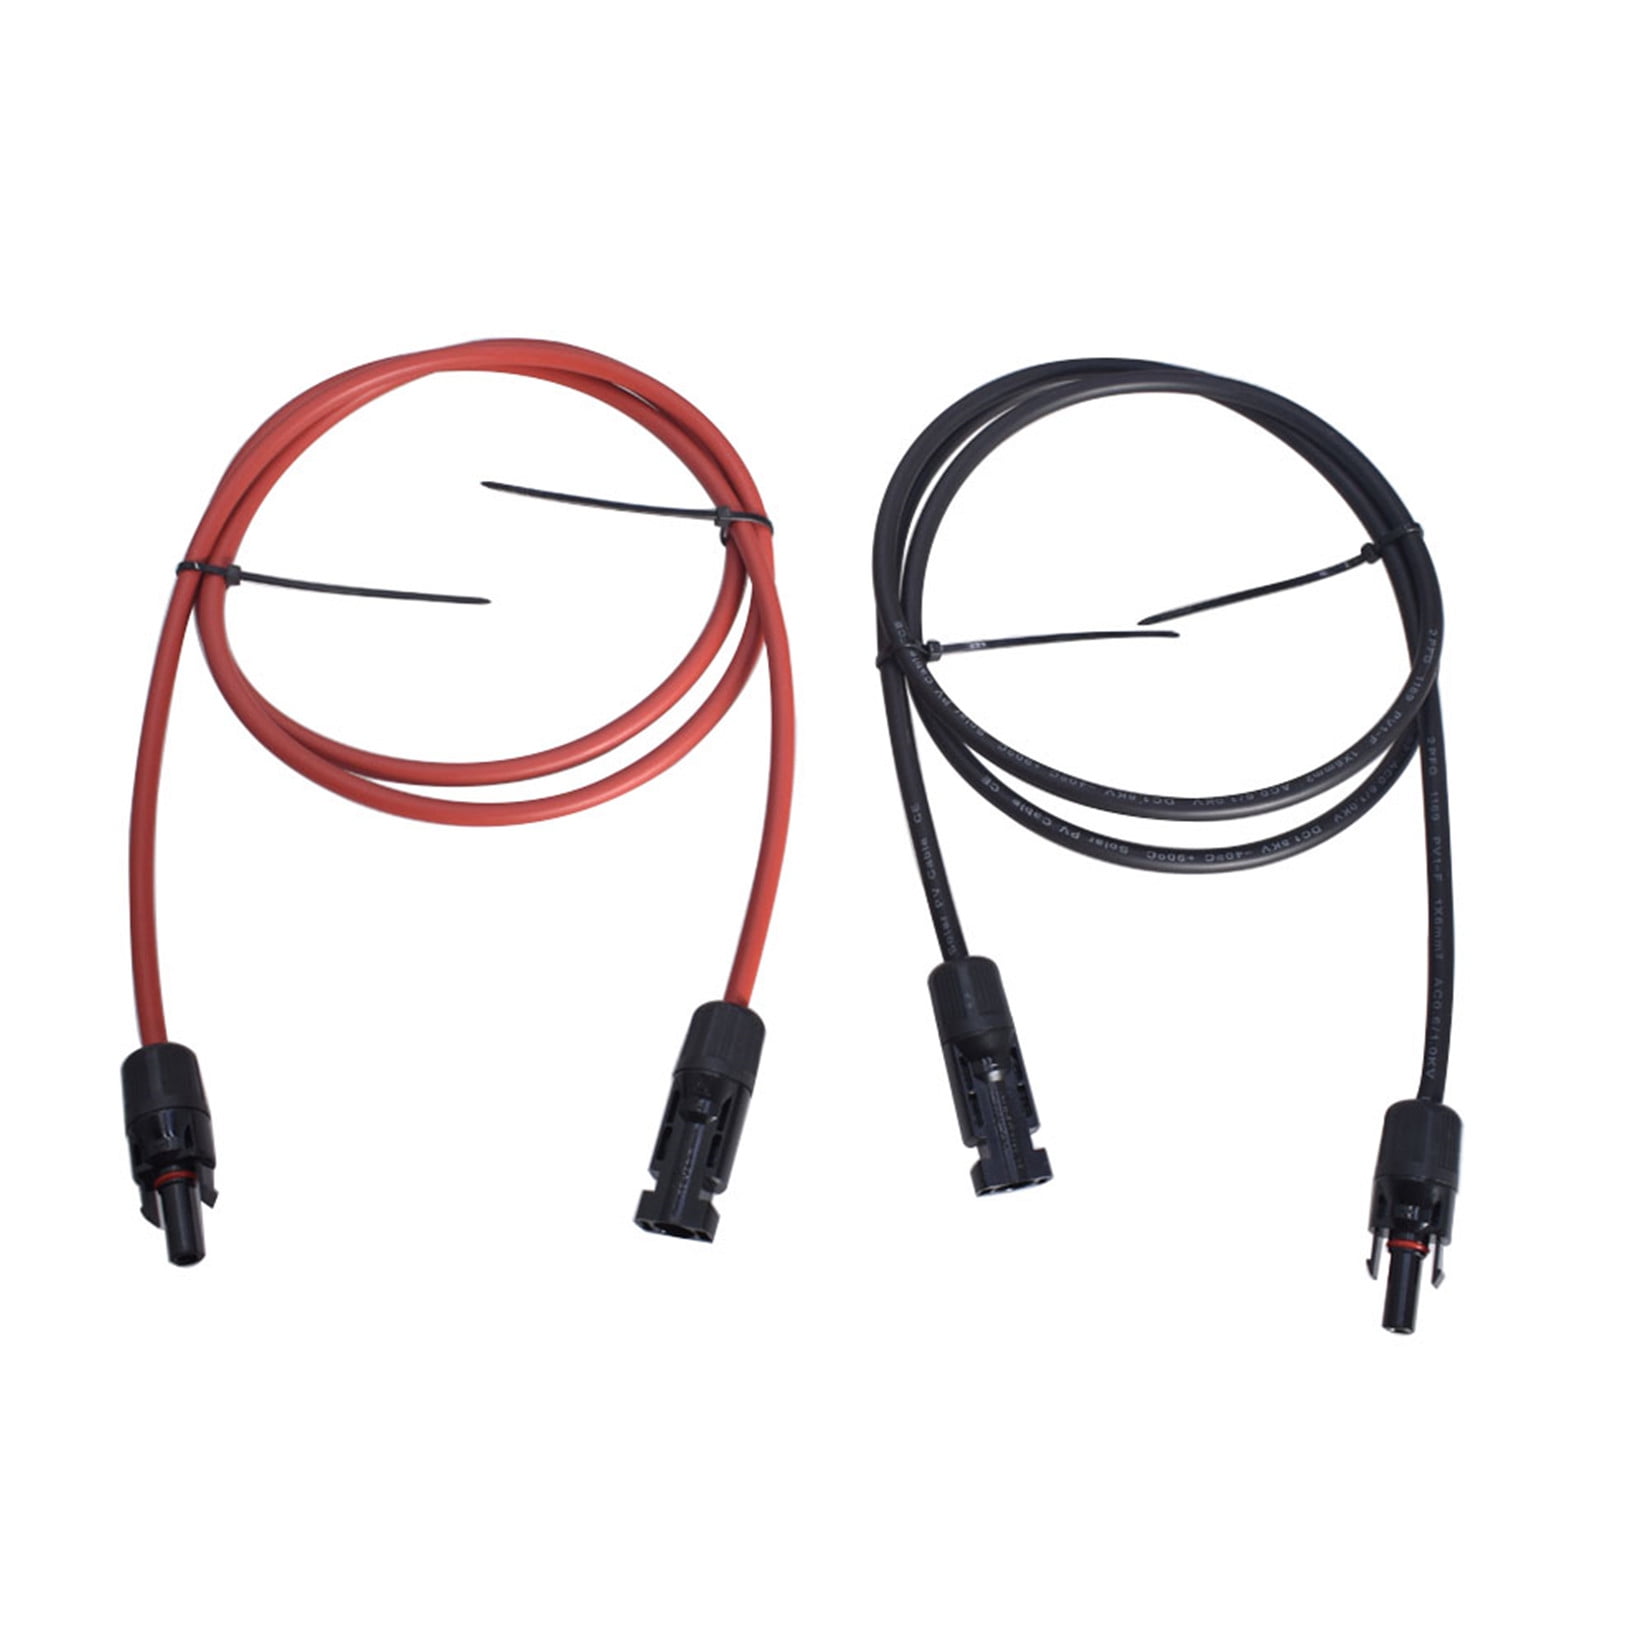 findmall 1 Pair Black + Red Solar Panel Extension Cable Wire